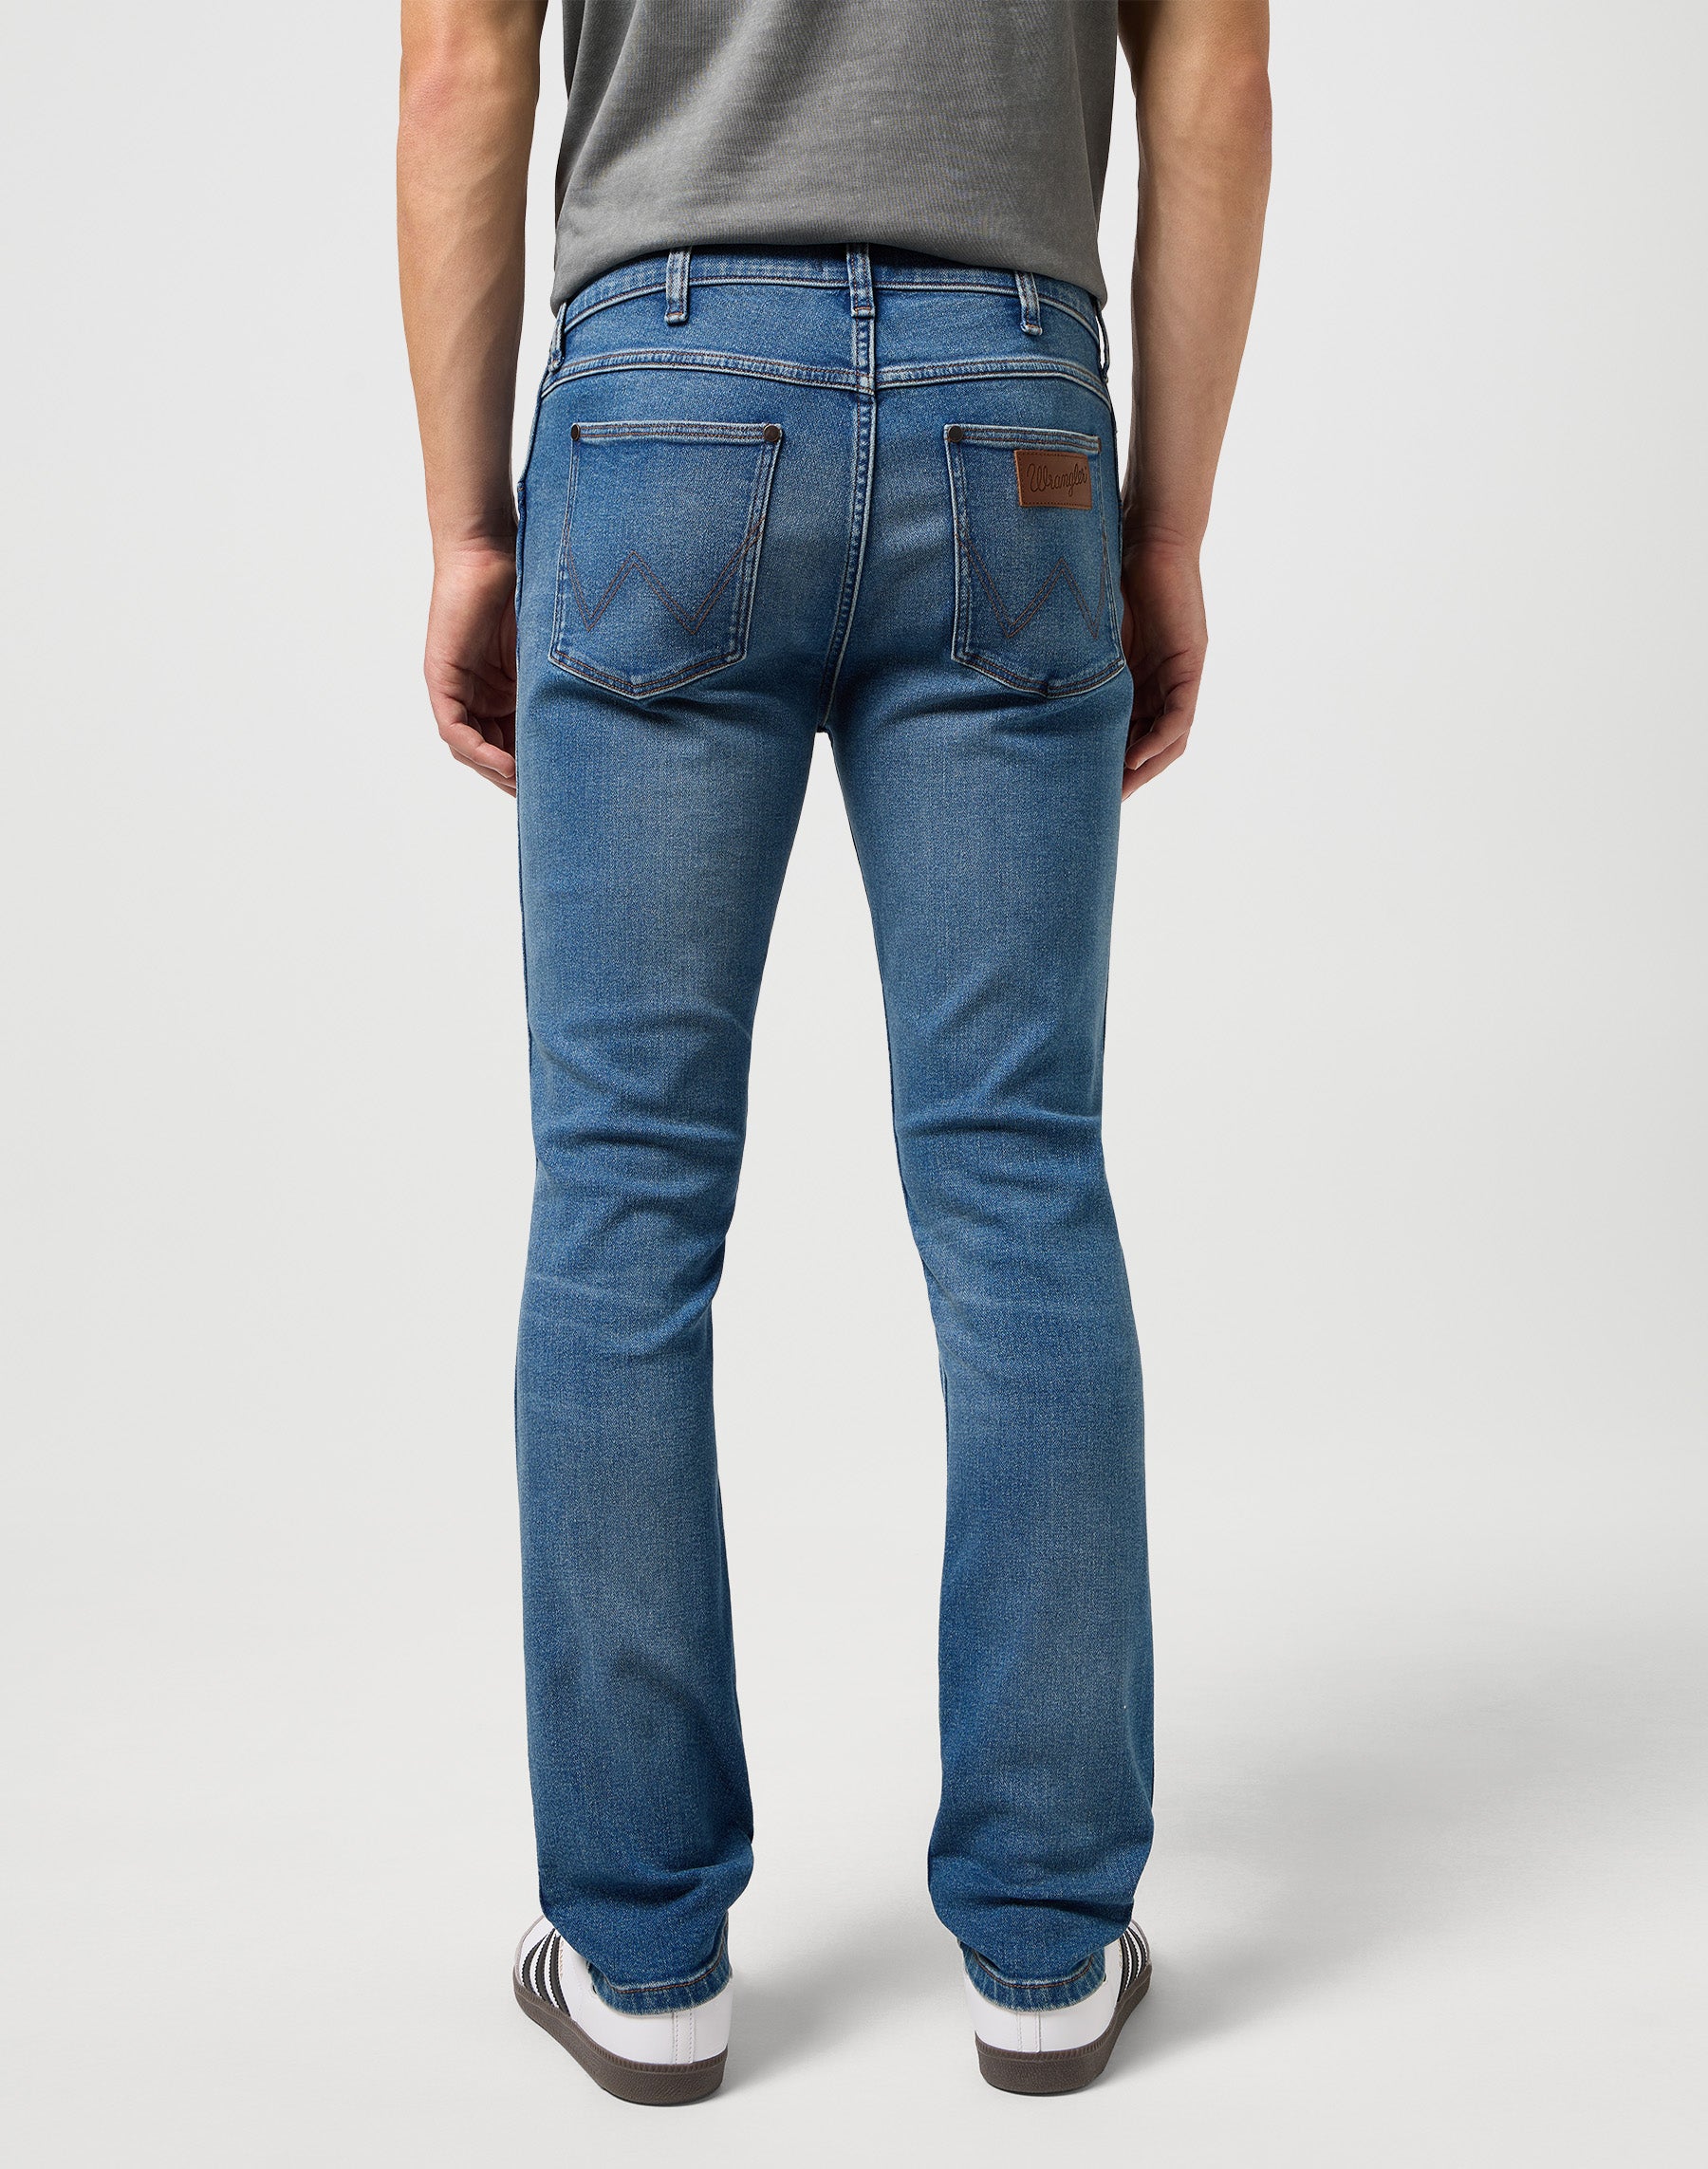 Greensboro Low Stretch in Crafted Jeans Wrangler   